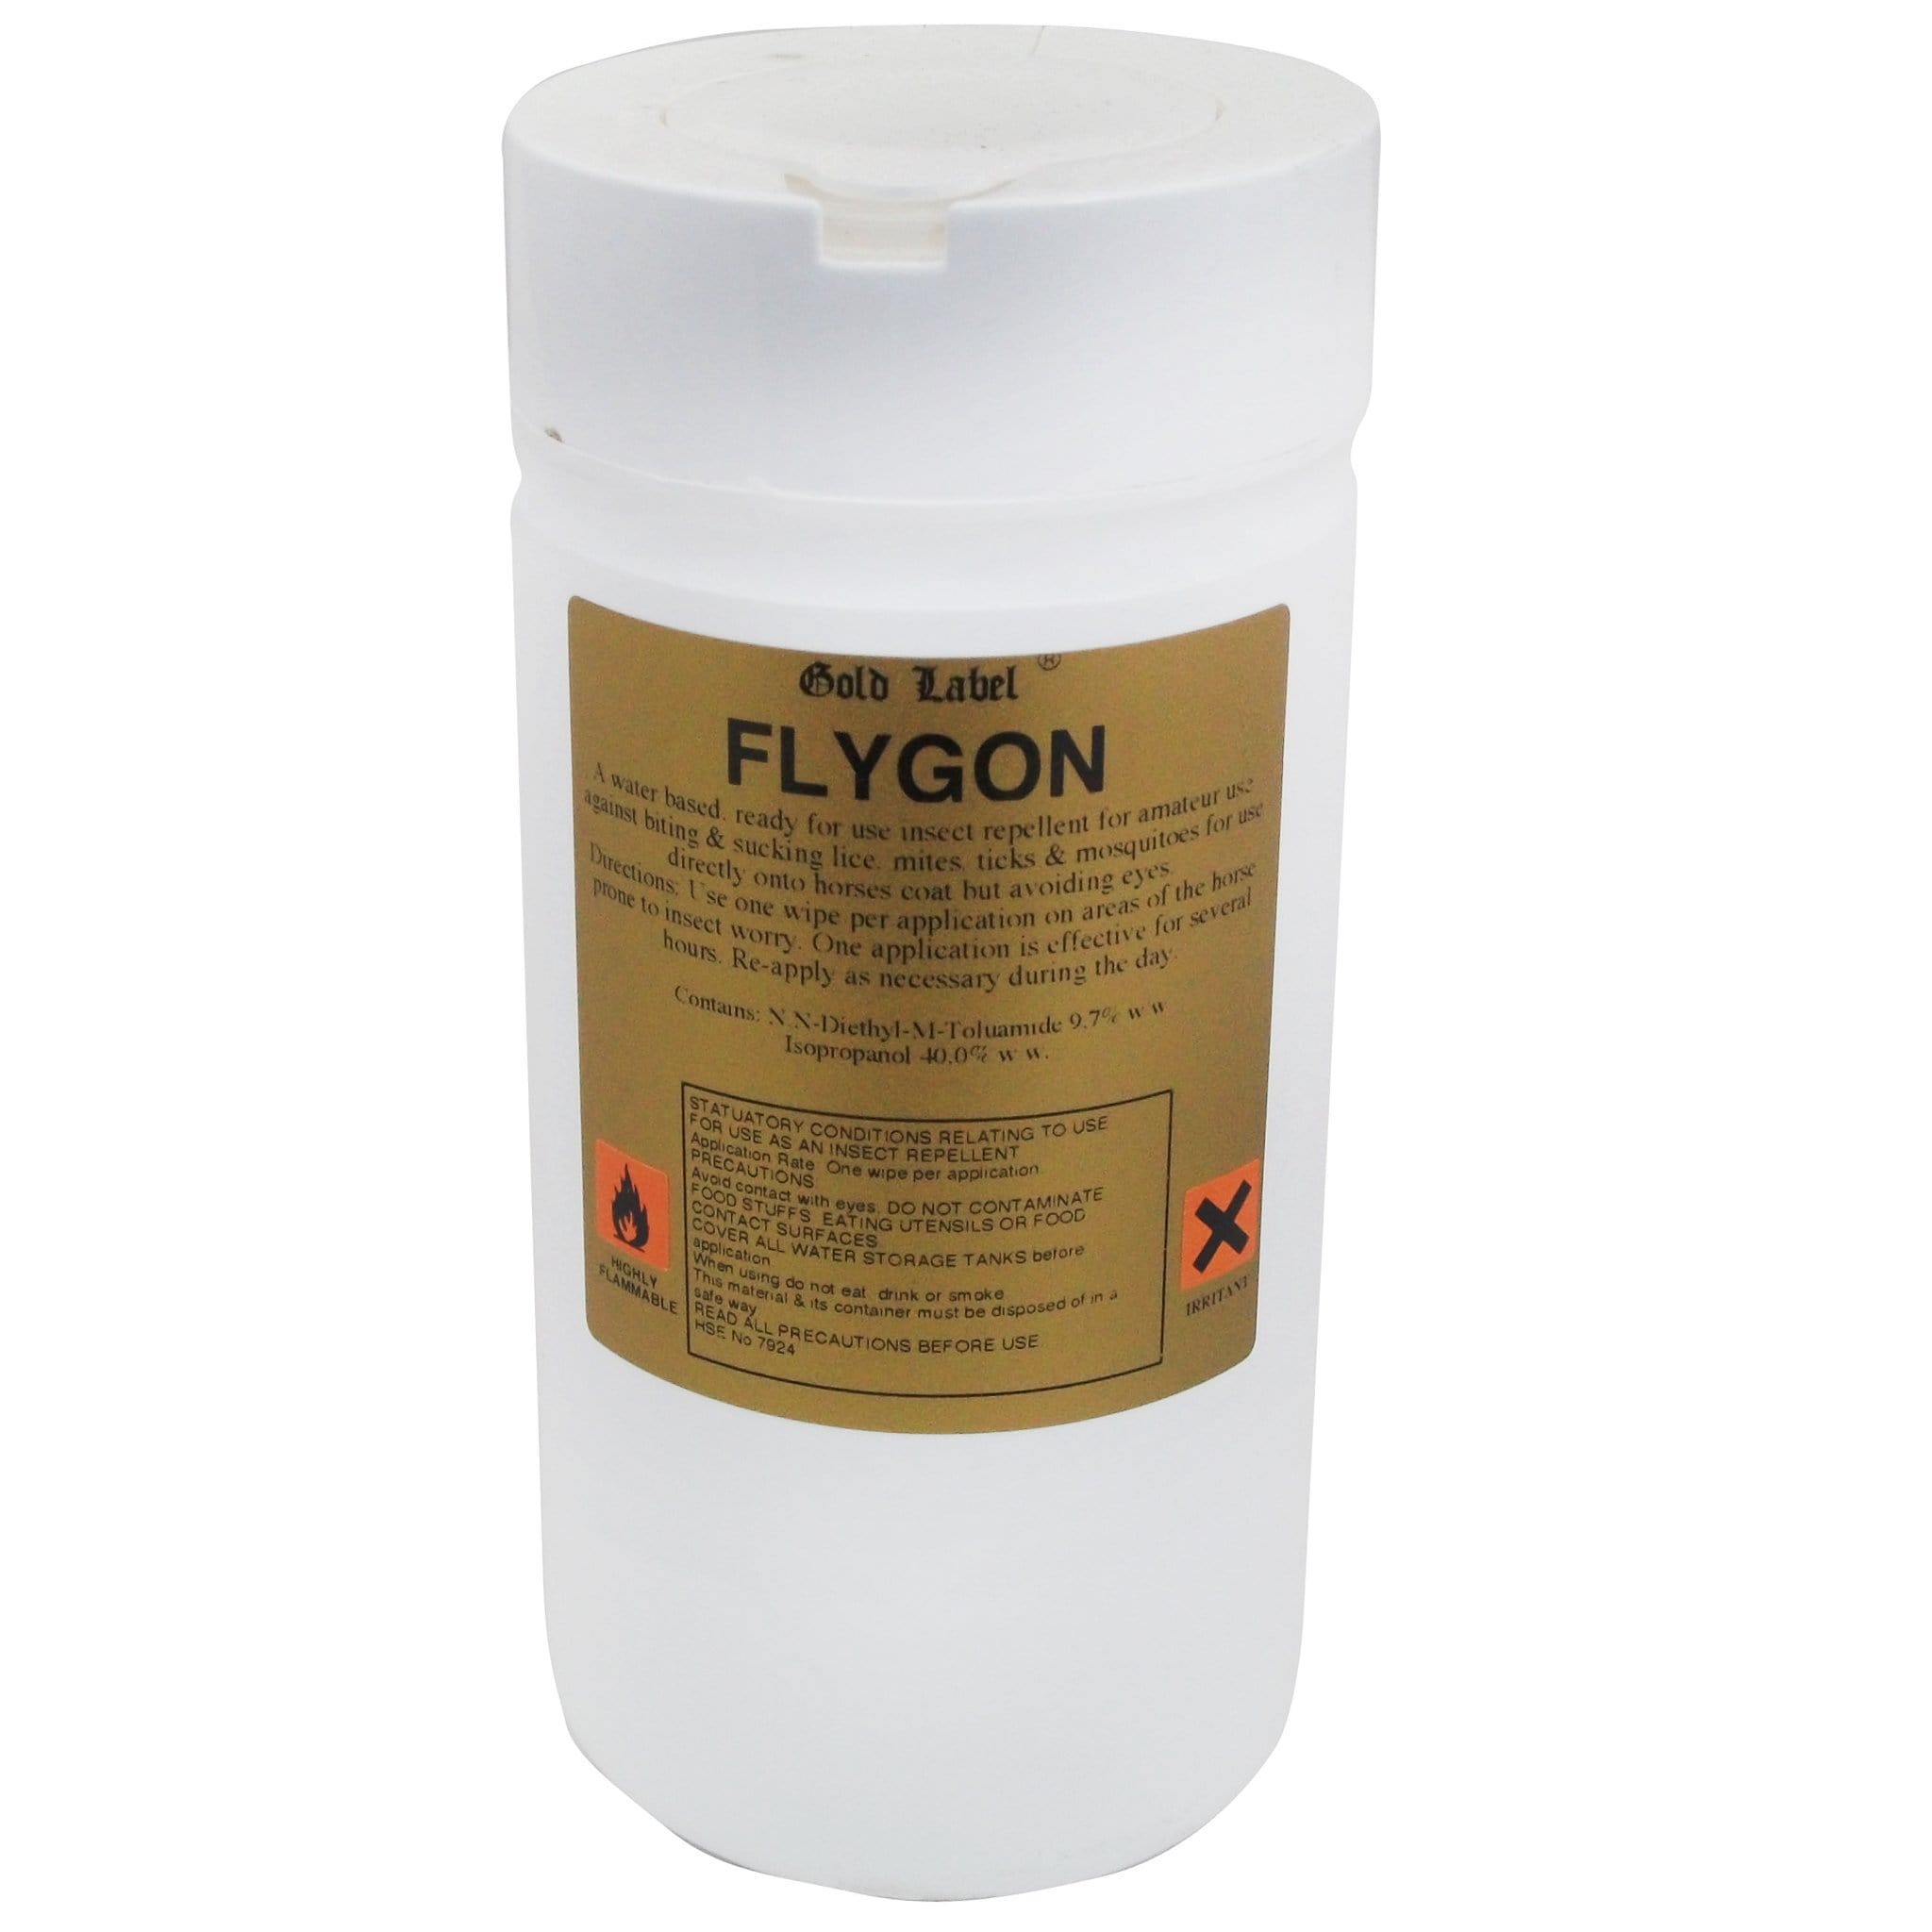 Gold Label Flygon 12 Wipes